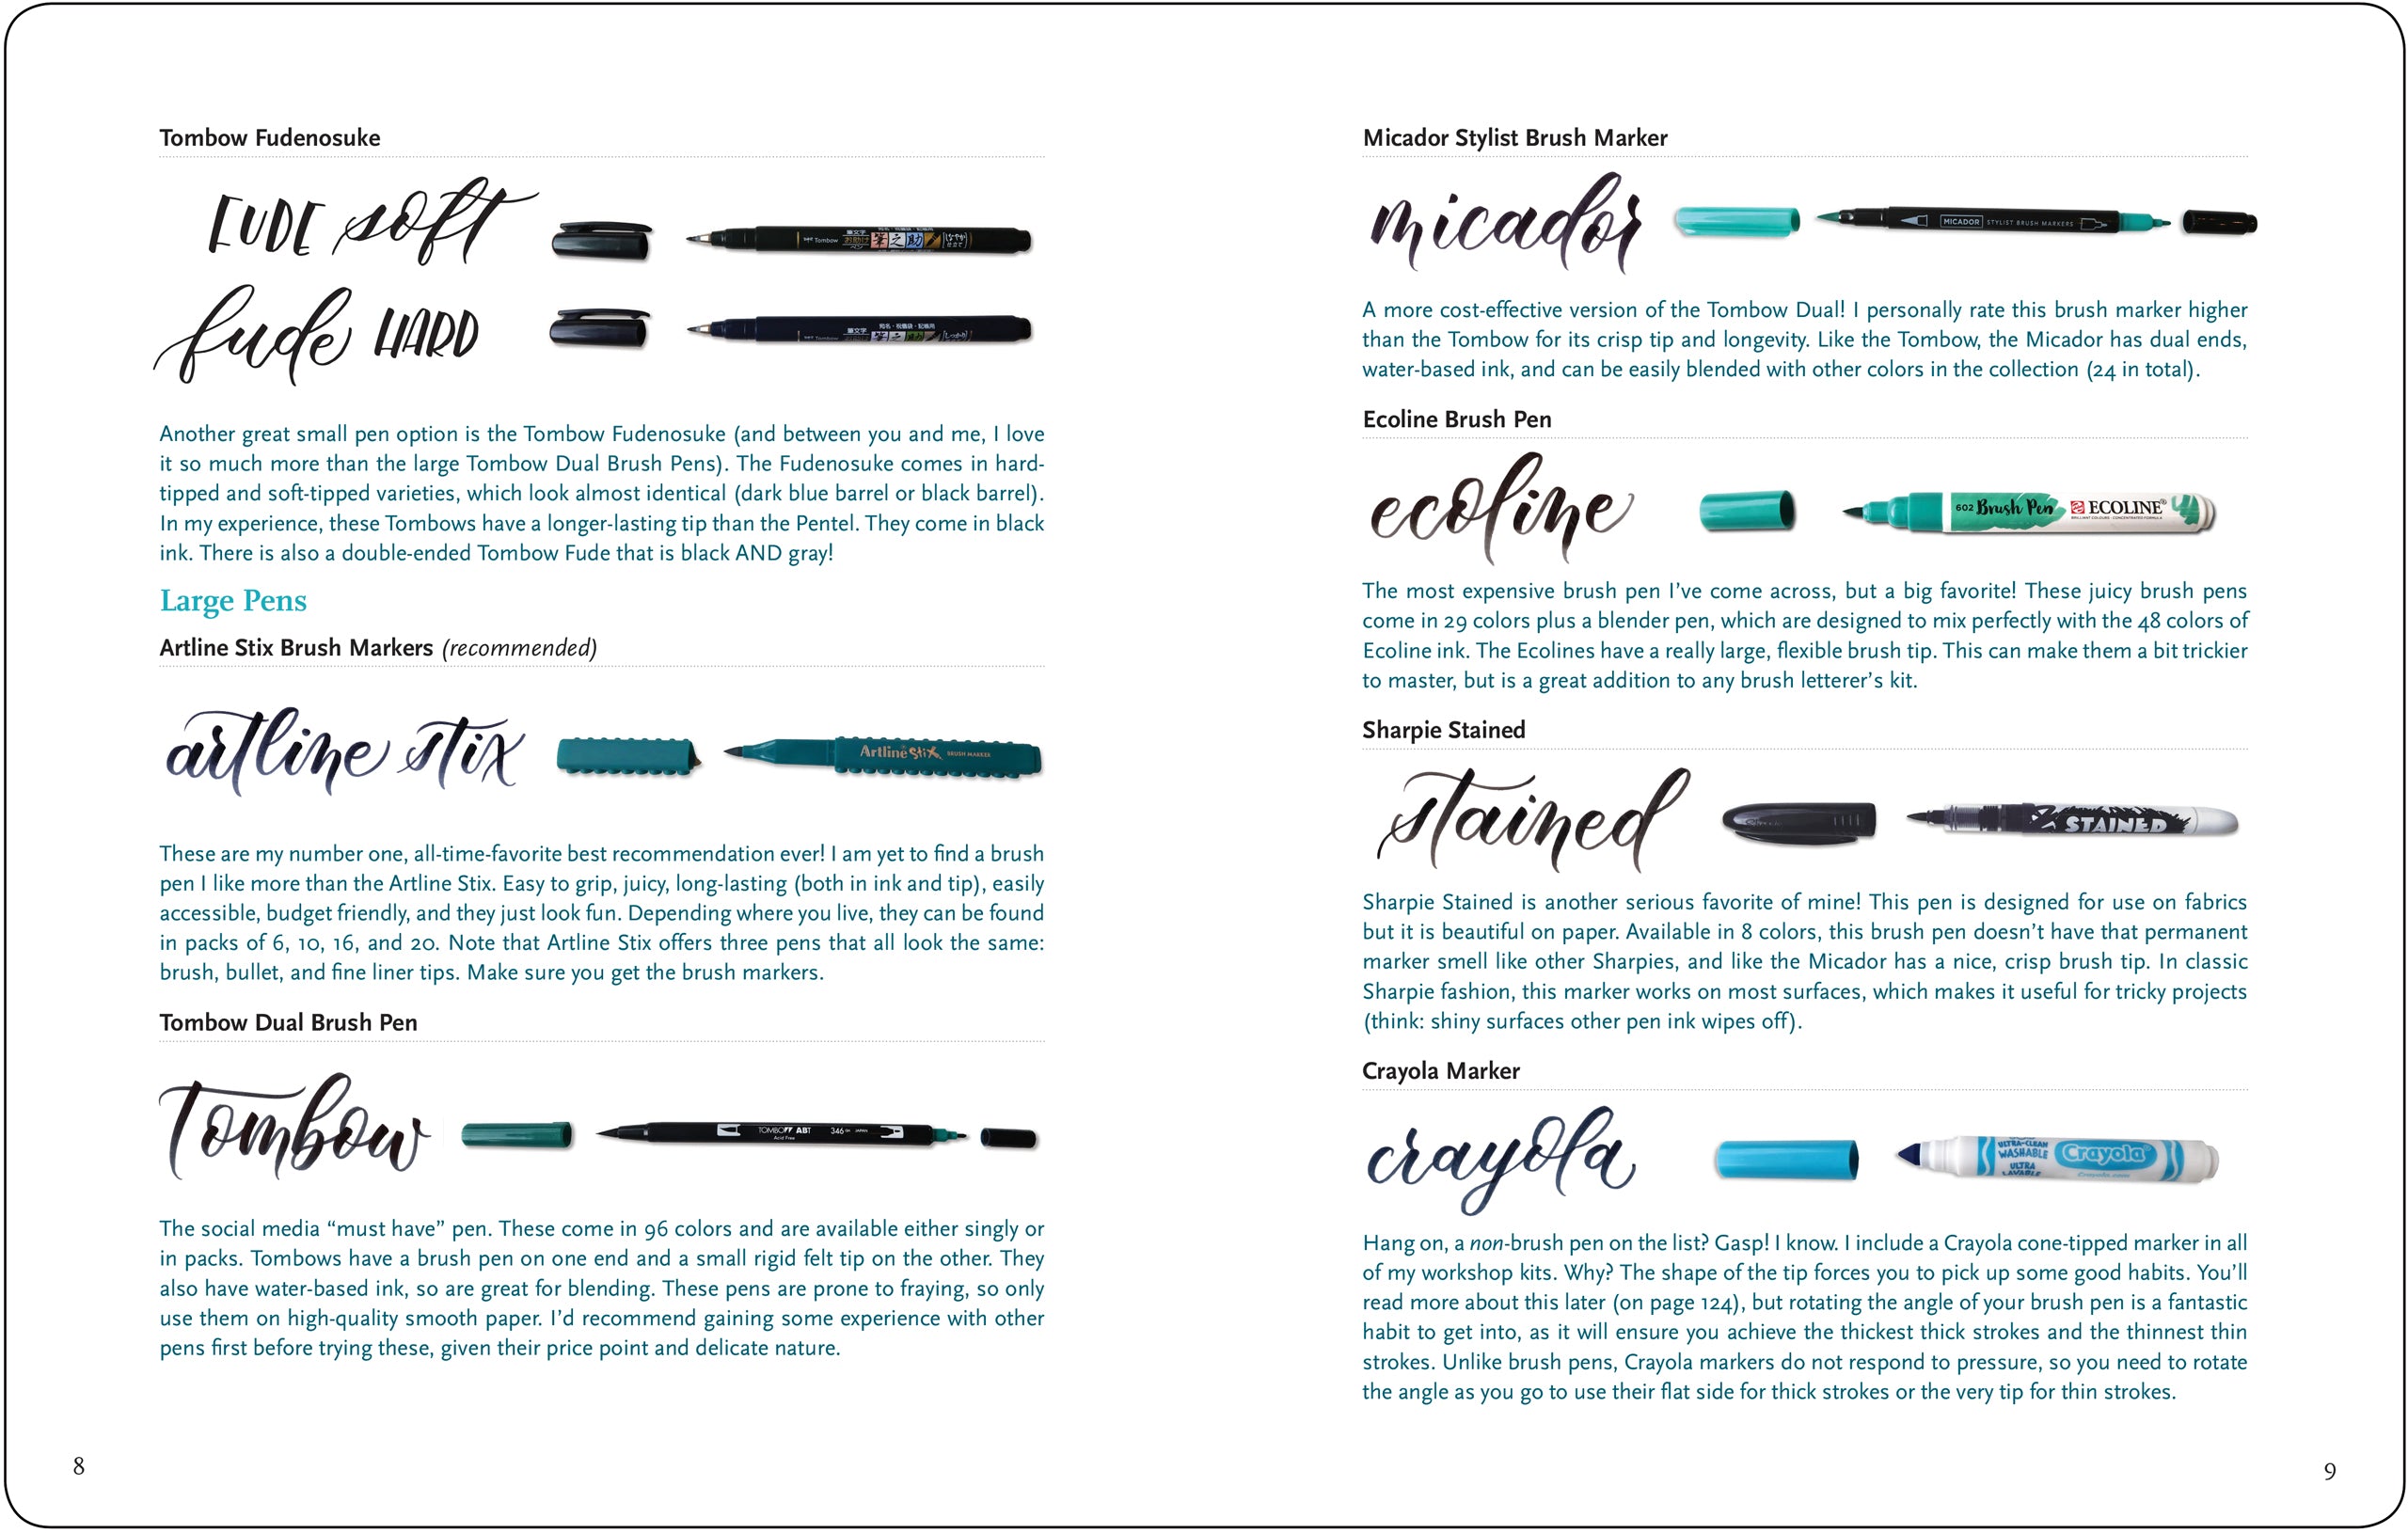 Brush Lettering - A to Z